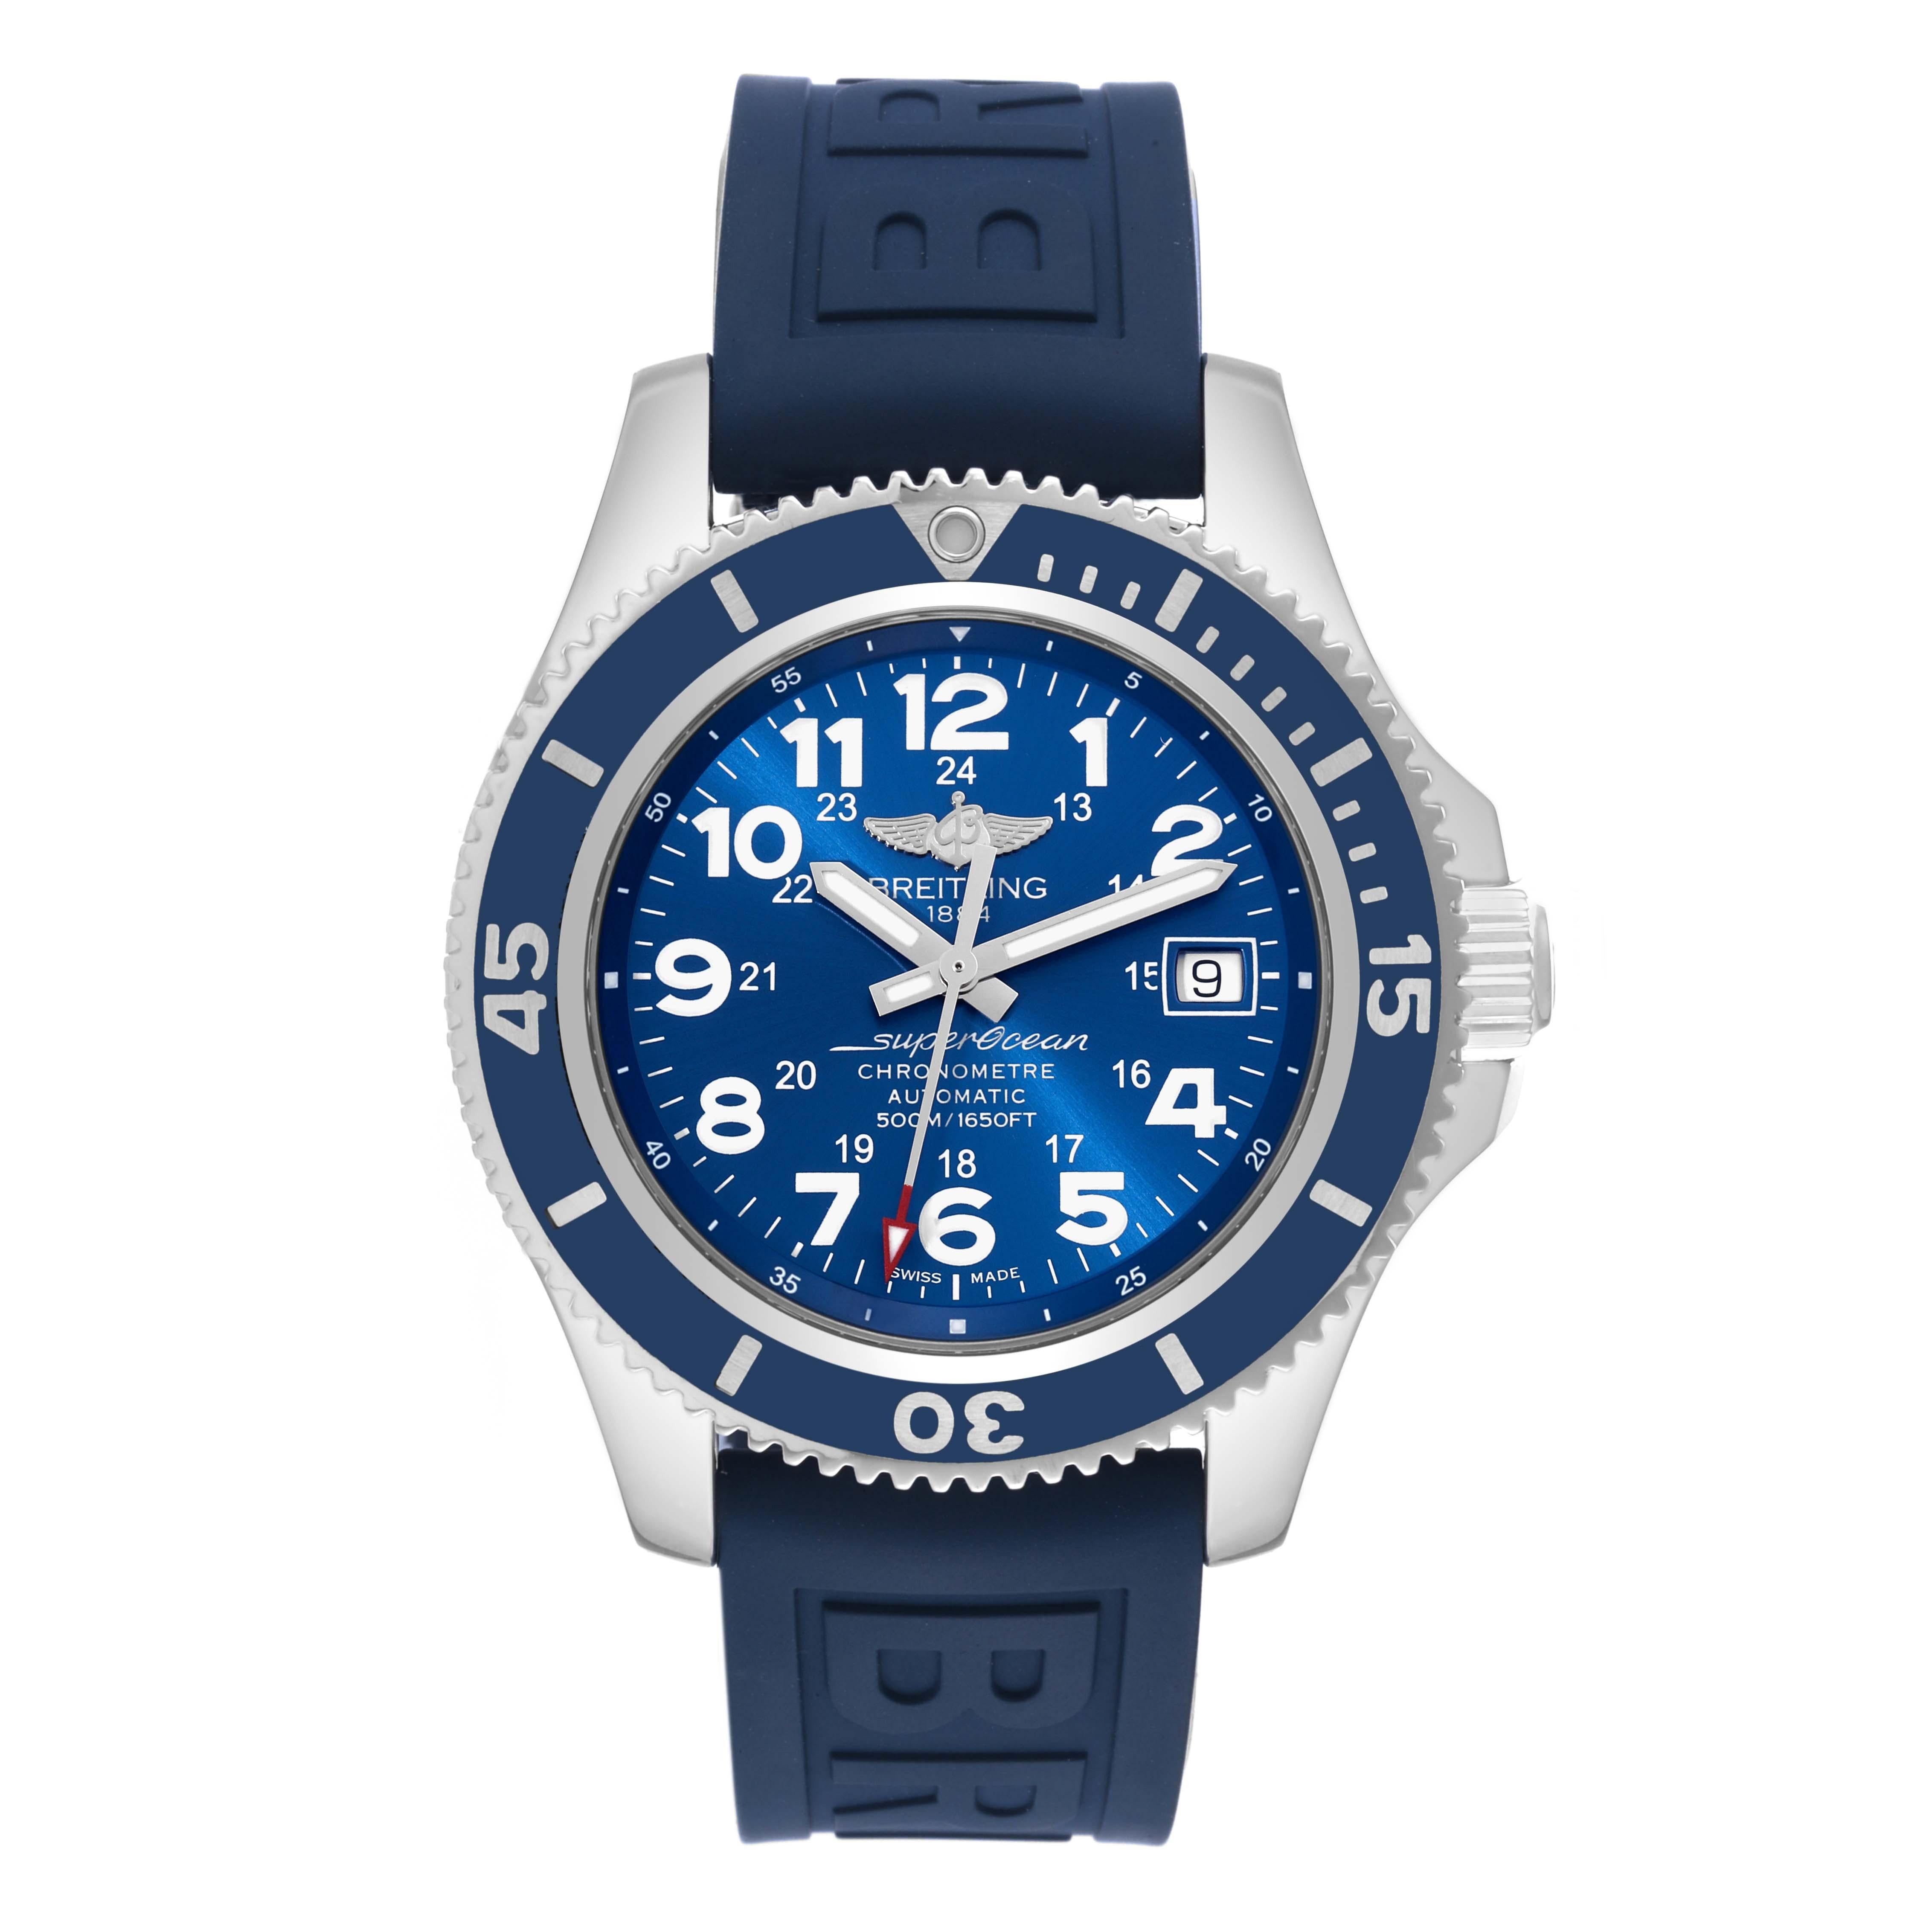 Breitling Superocean II Blue Dial Steel Mens Watch A17365 Box Card. Automatic self-winding movement. Stainless steel case 42 mm in diameter. Stainless steel screwed-down crown. Blue unidirectional rotating bezel. 0-60 elapsed-time. Scratch resistant